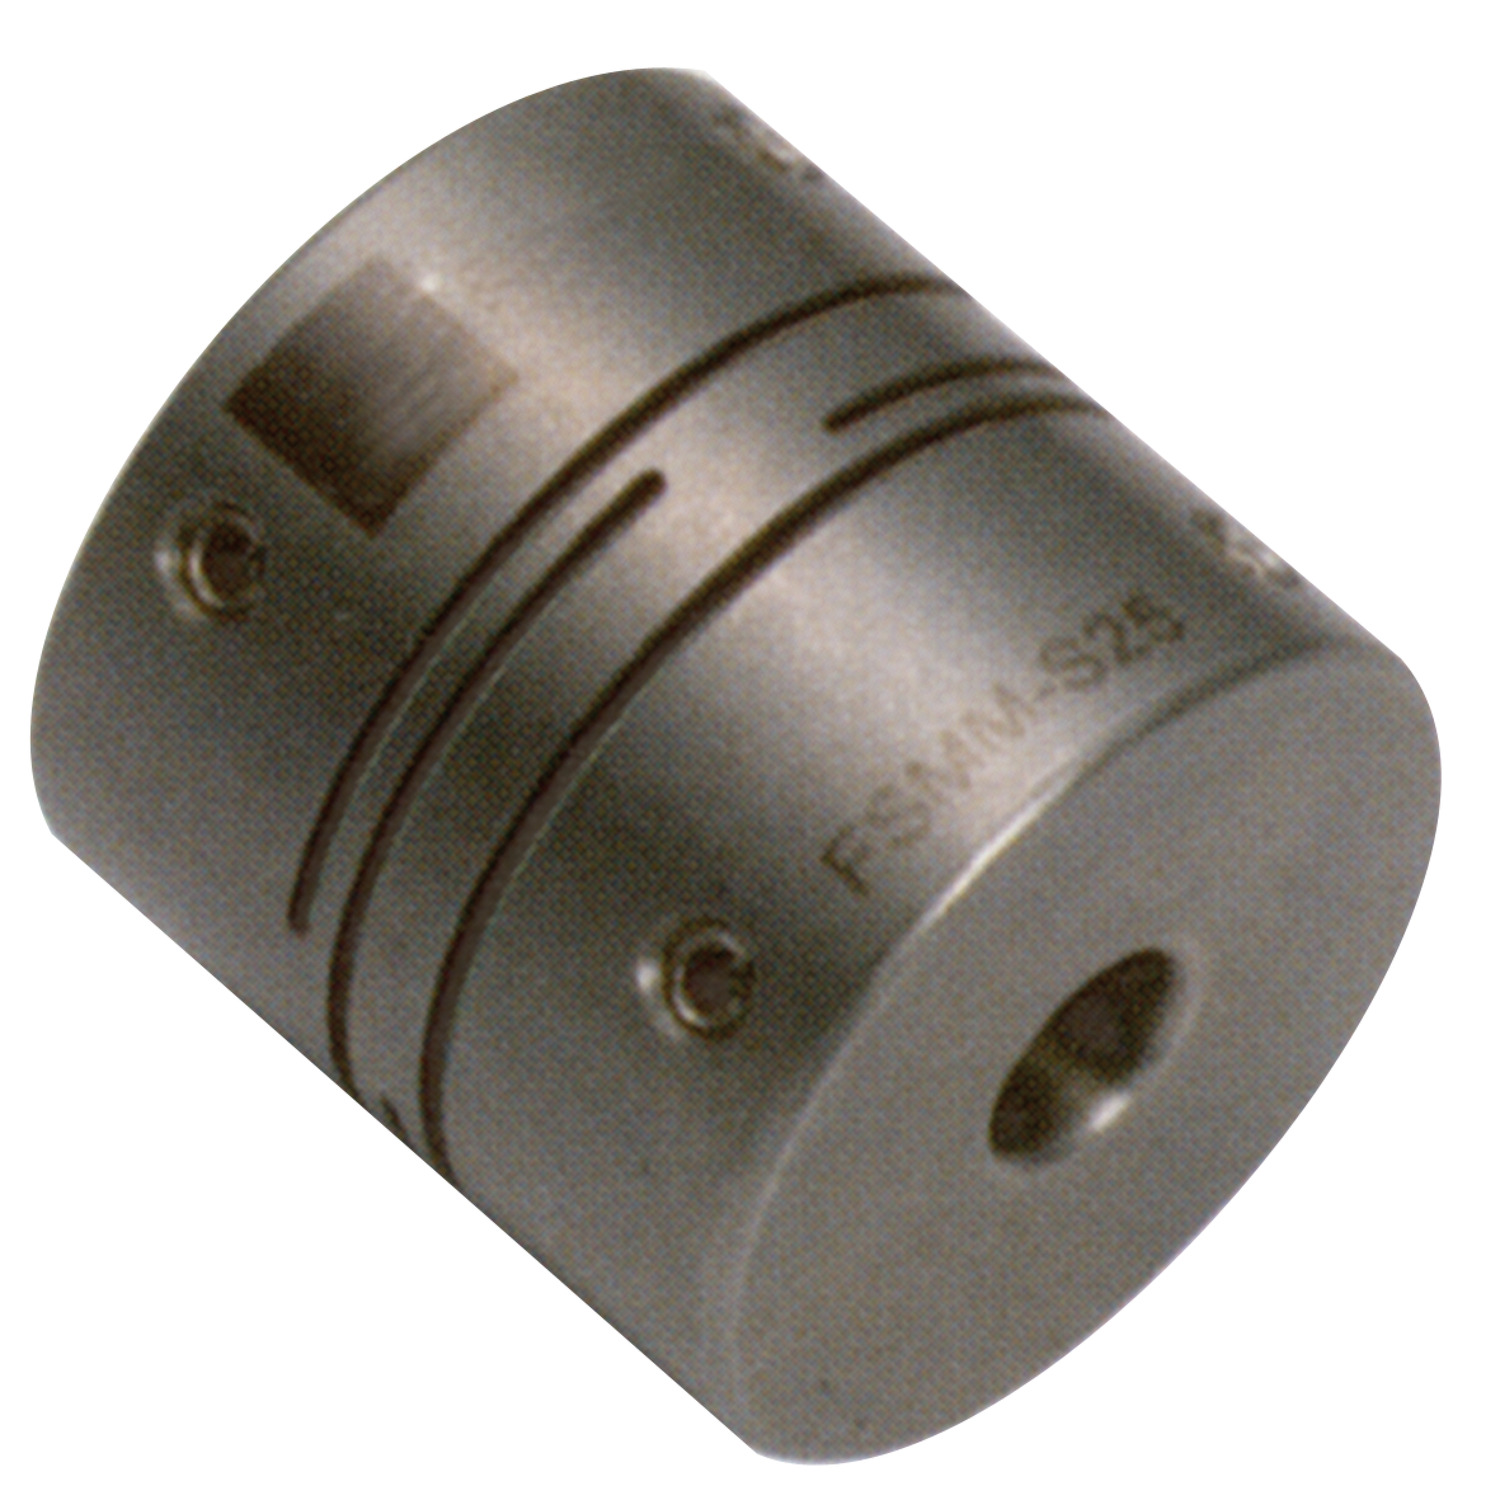 R3008 - Spiral Beam Coupling - Stainless steel